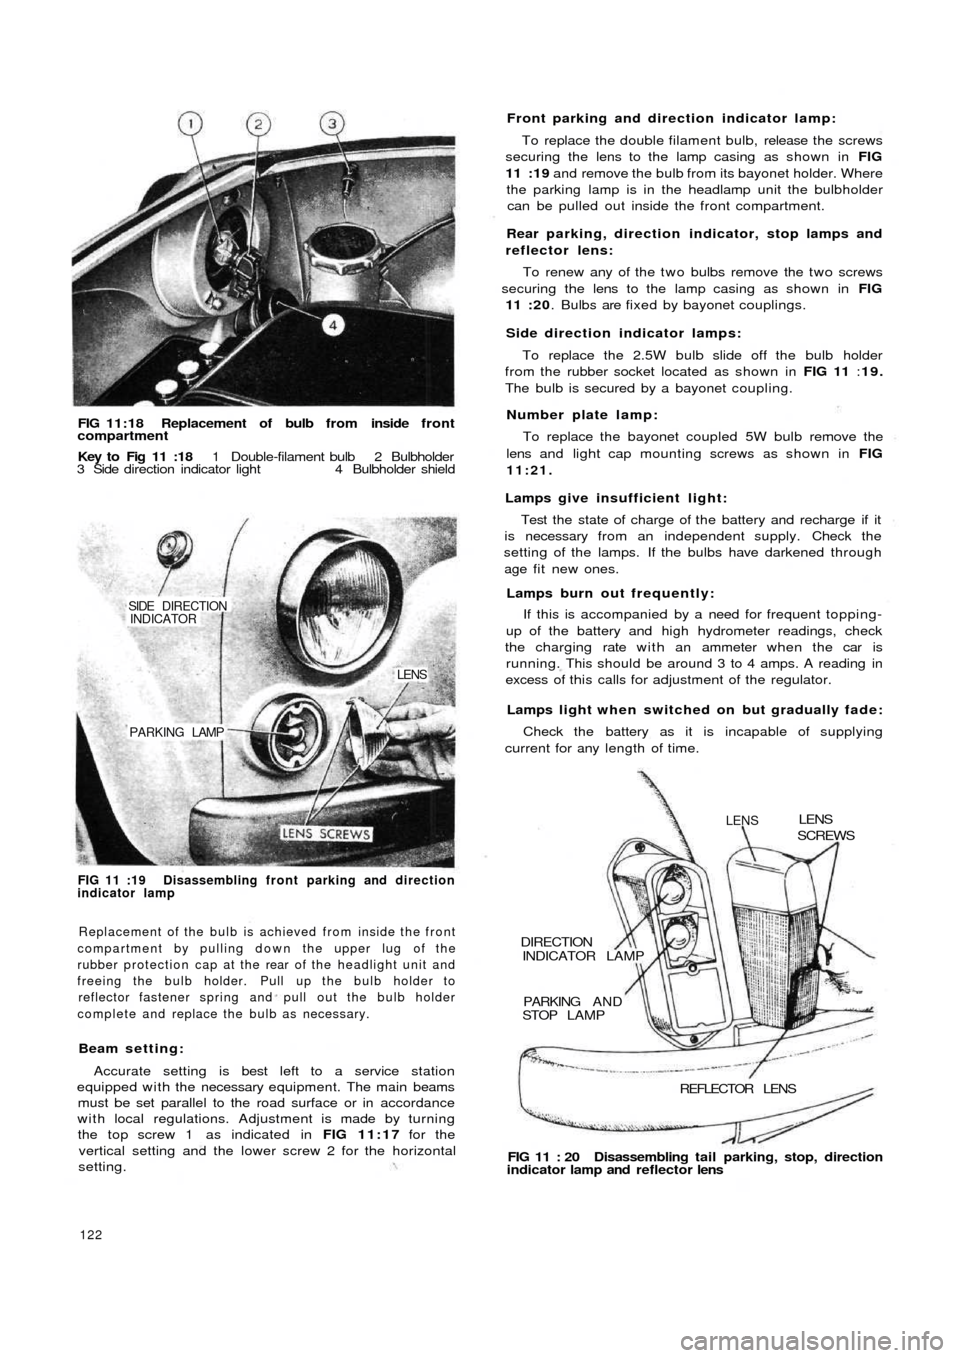 FIAT 500 1965 1.G Workshop Manual FIG 11:18 Replacement of bulb from inside f r o n tcompartment
Key to  Fig 11 :18 1 Double-filament bulb 2 Bulbholder
3 Side direction indicator light 4 Bulbholder shield
PARKING LAMP
LENS
SIDE  DIREC